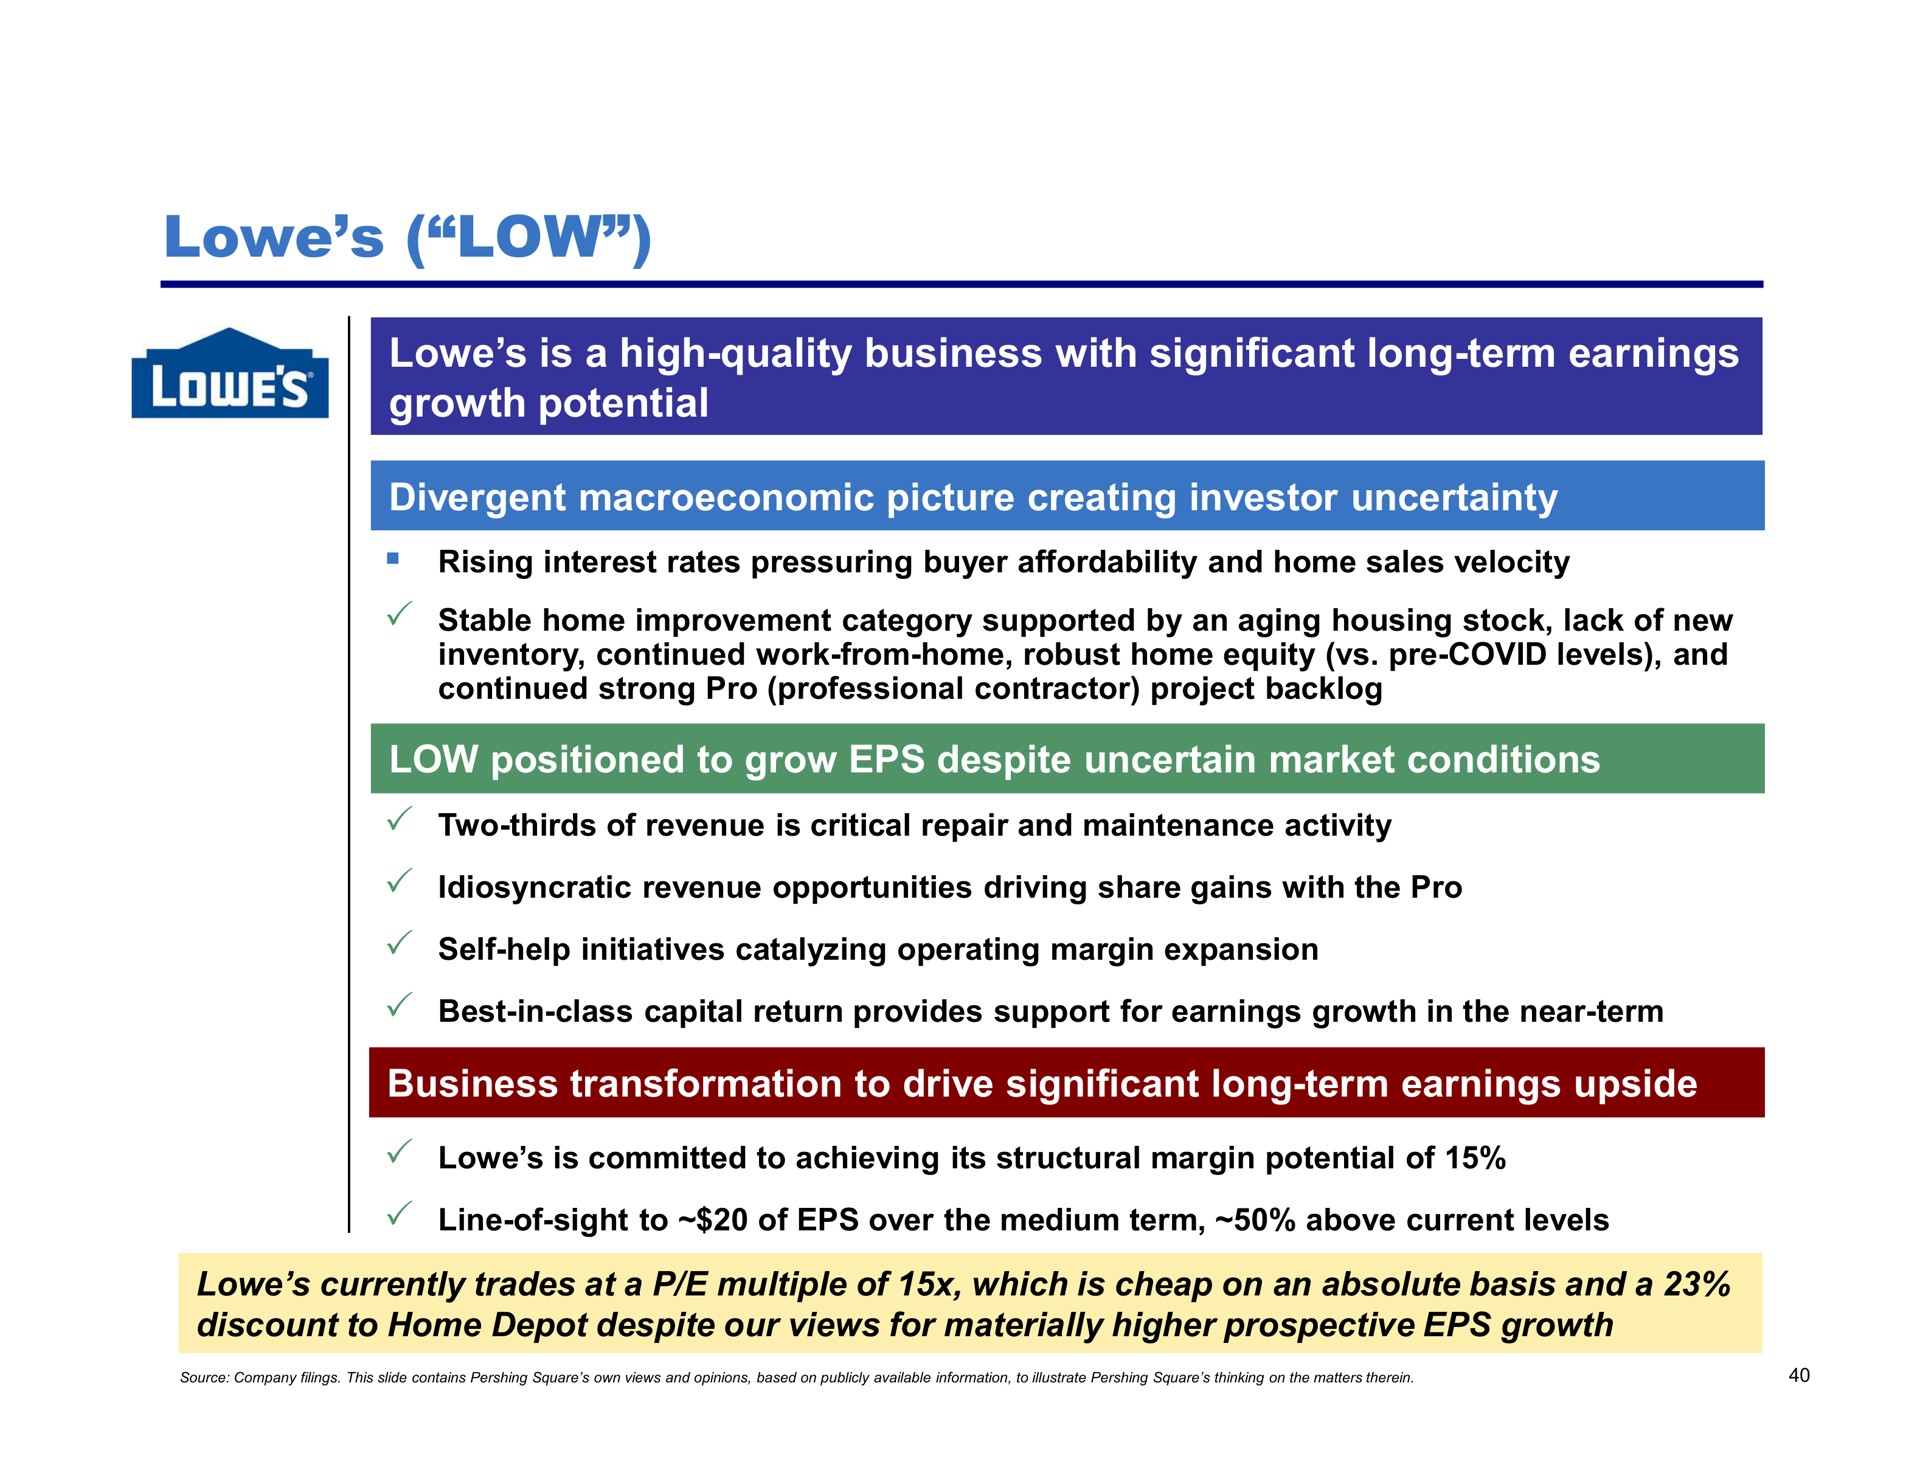 low is a high quality business with significant long term earnings growth potential divergent picture creating investor uncertainty low positioned to grow despite uncertain market conditions business transformation to drive significant long term earnings upside | Pershing Square